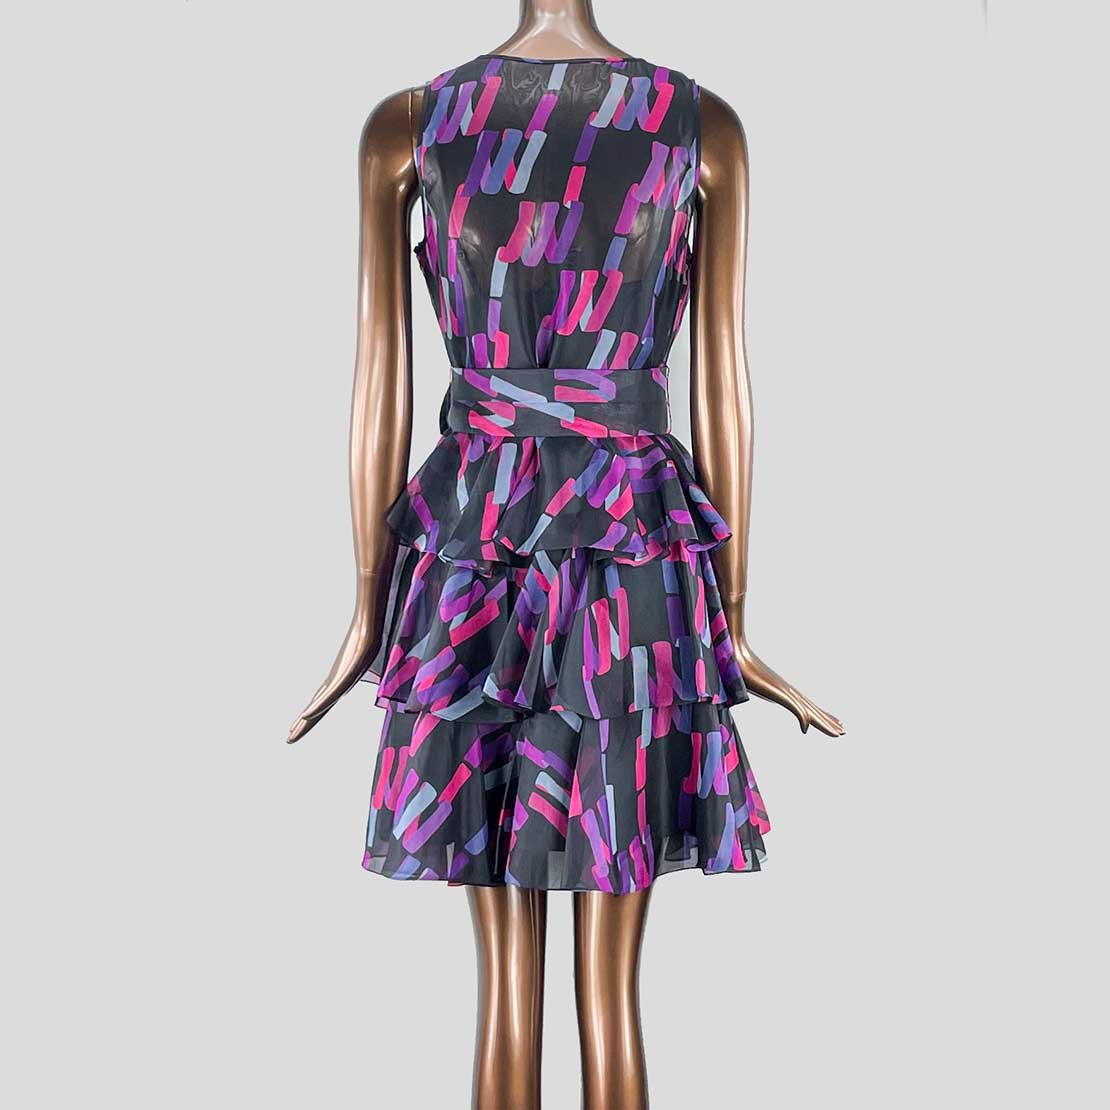 Marc by Marc Jacobs Cocktail Dress - 6 US